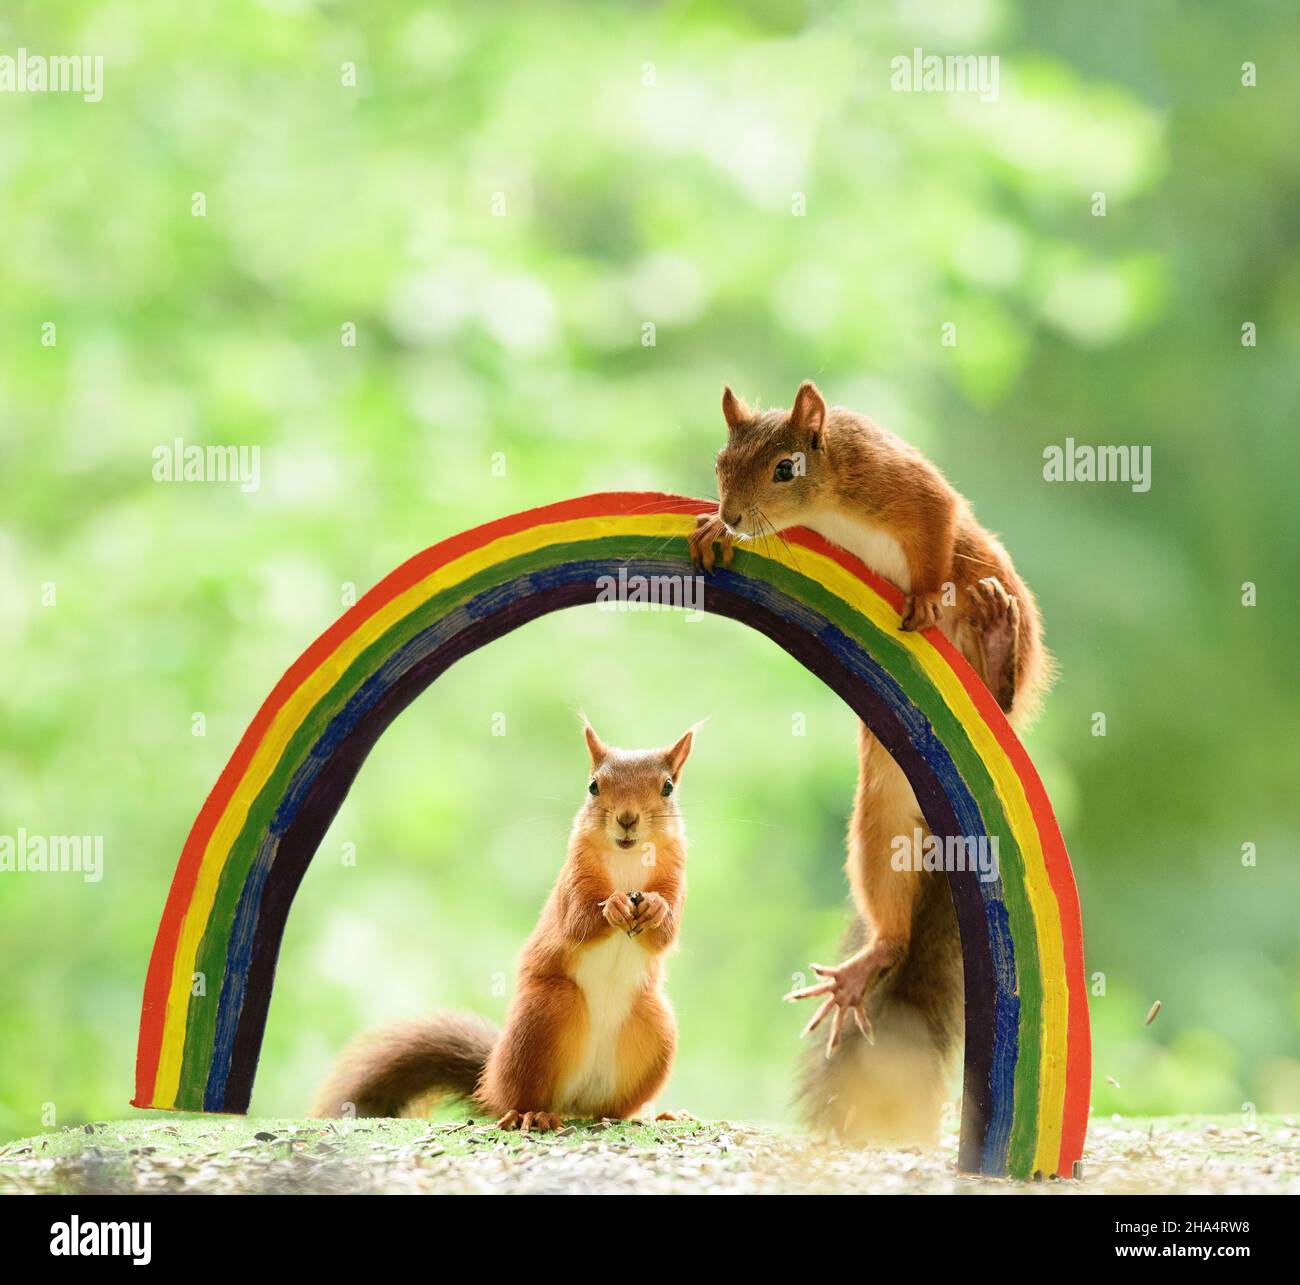 red squirrels are standing with a rainbow looking at viewer Stock Photo